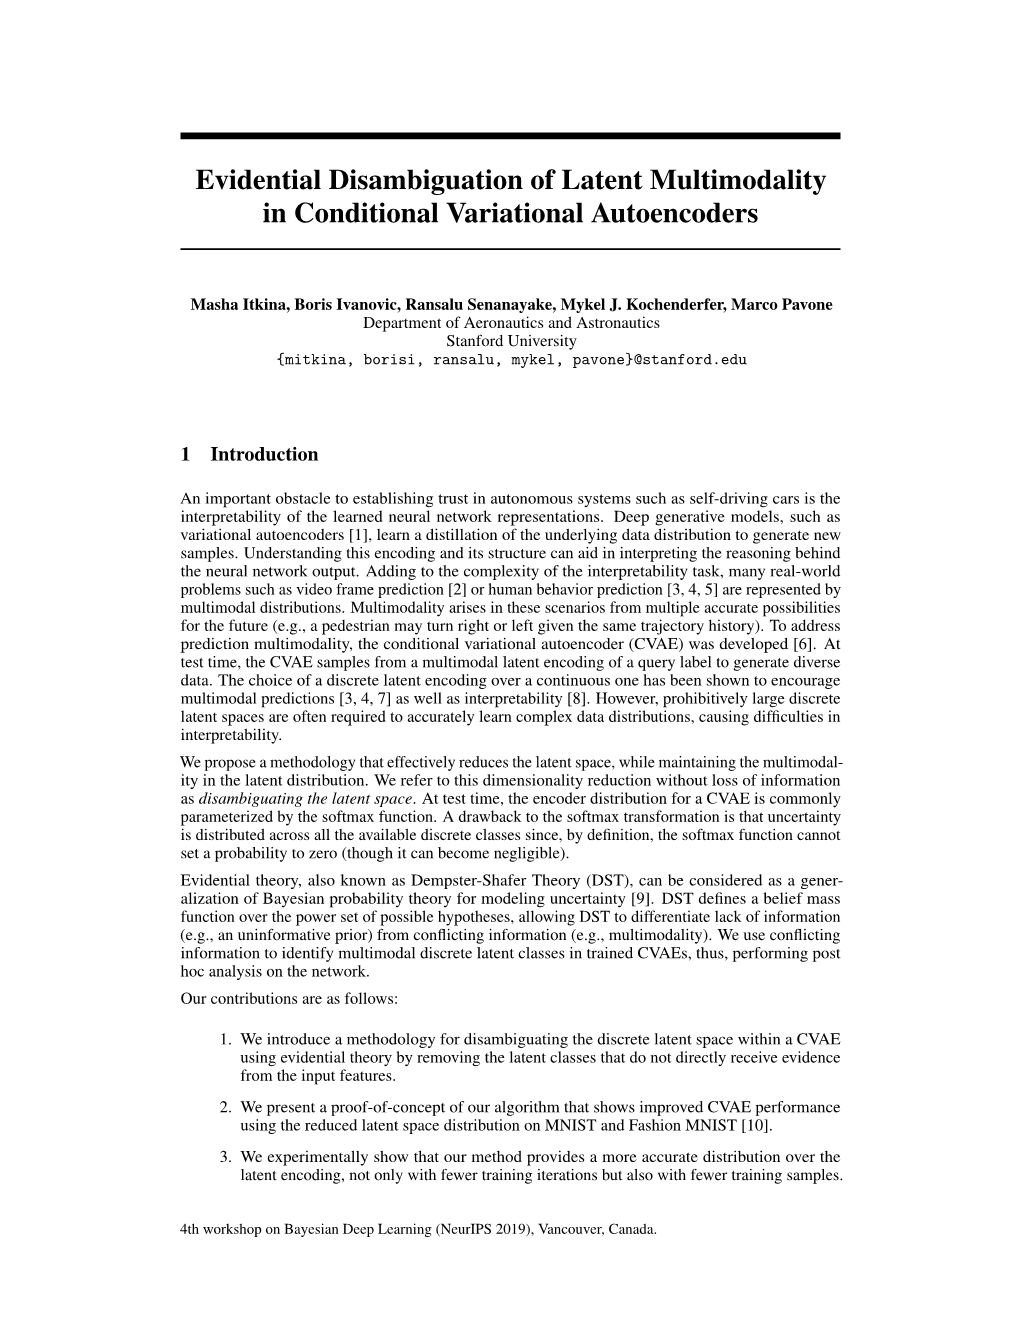 Evidential Disambiguation of Latent Multimodality in Conditional Variational Autoencoders